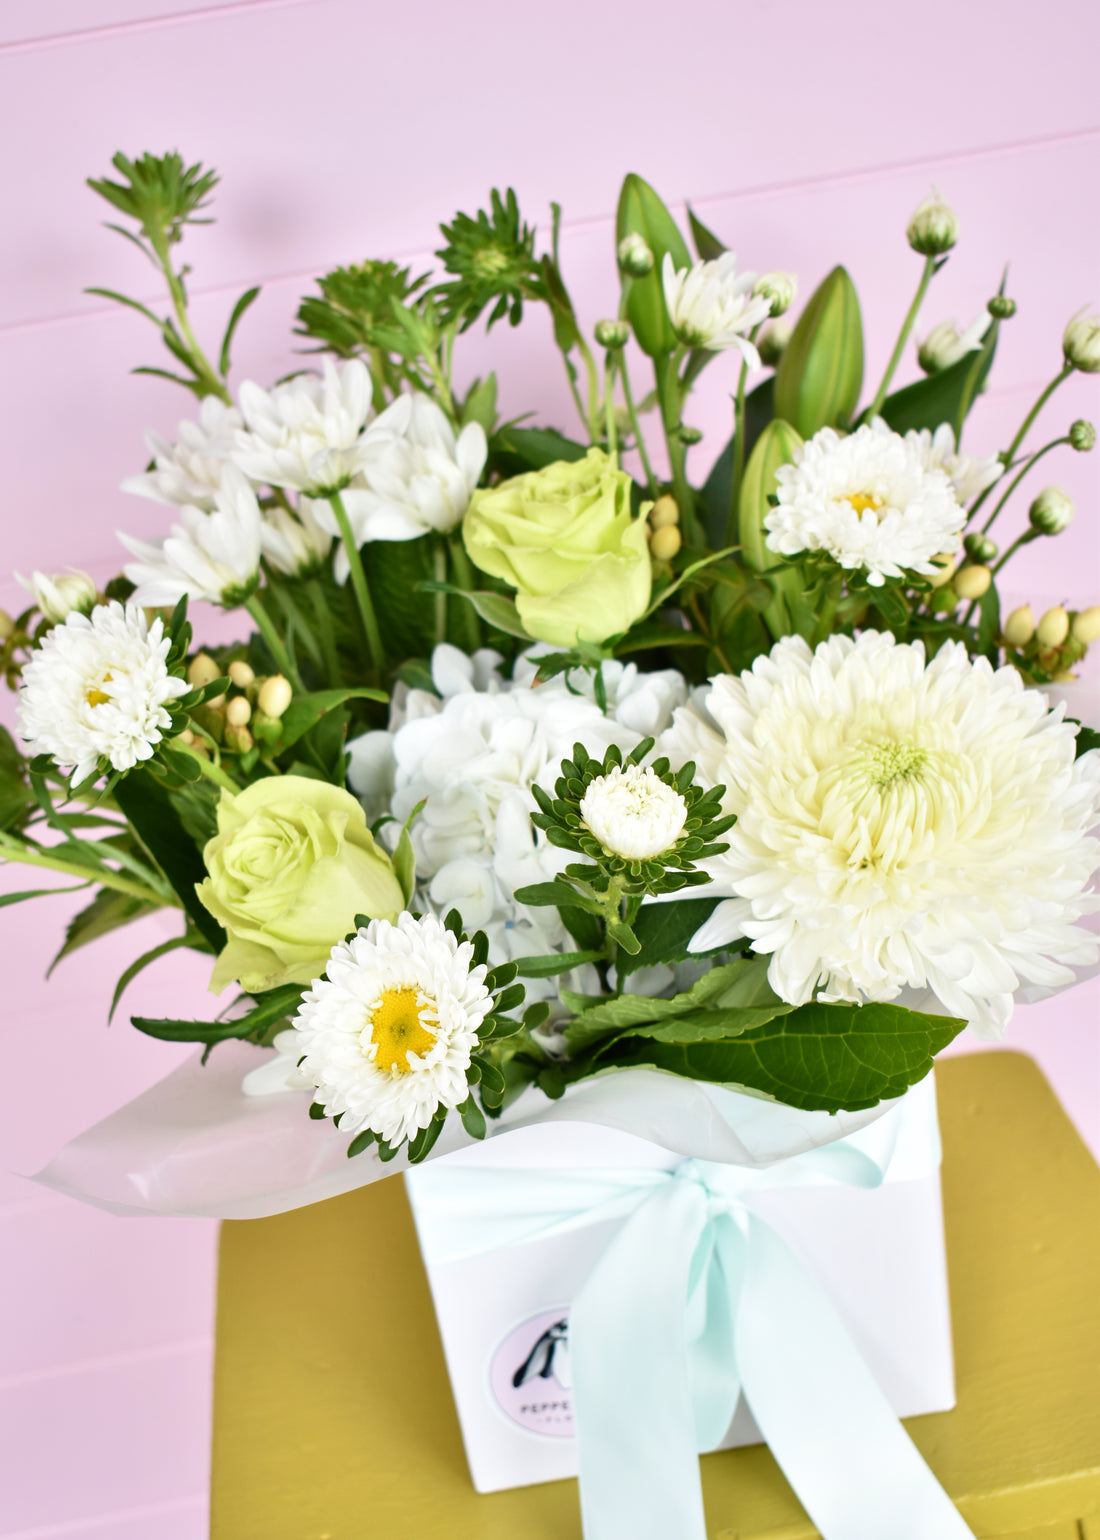 White &amp; green fresh flowers in a white box. Roses, chrysanthemums and hydrangea